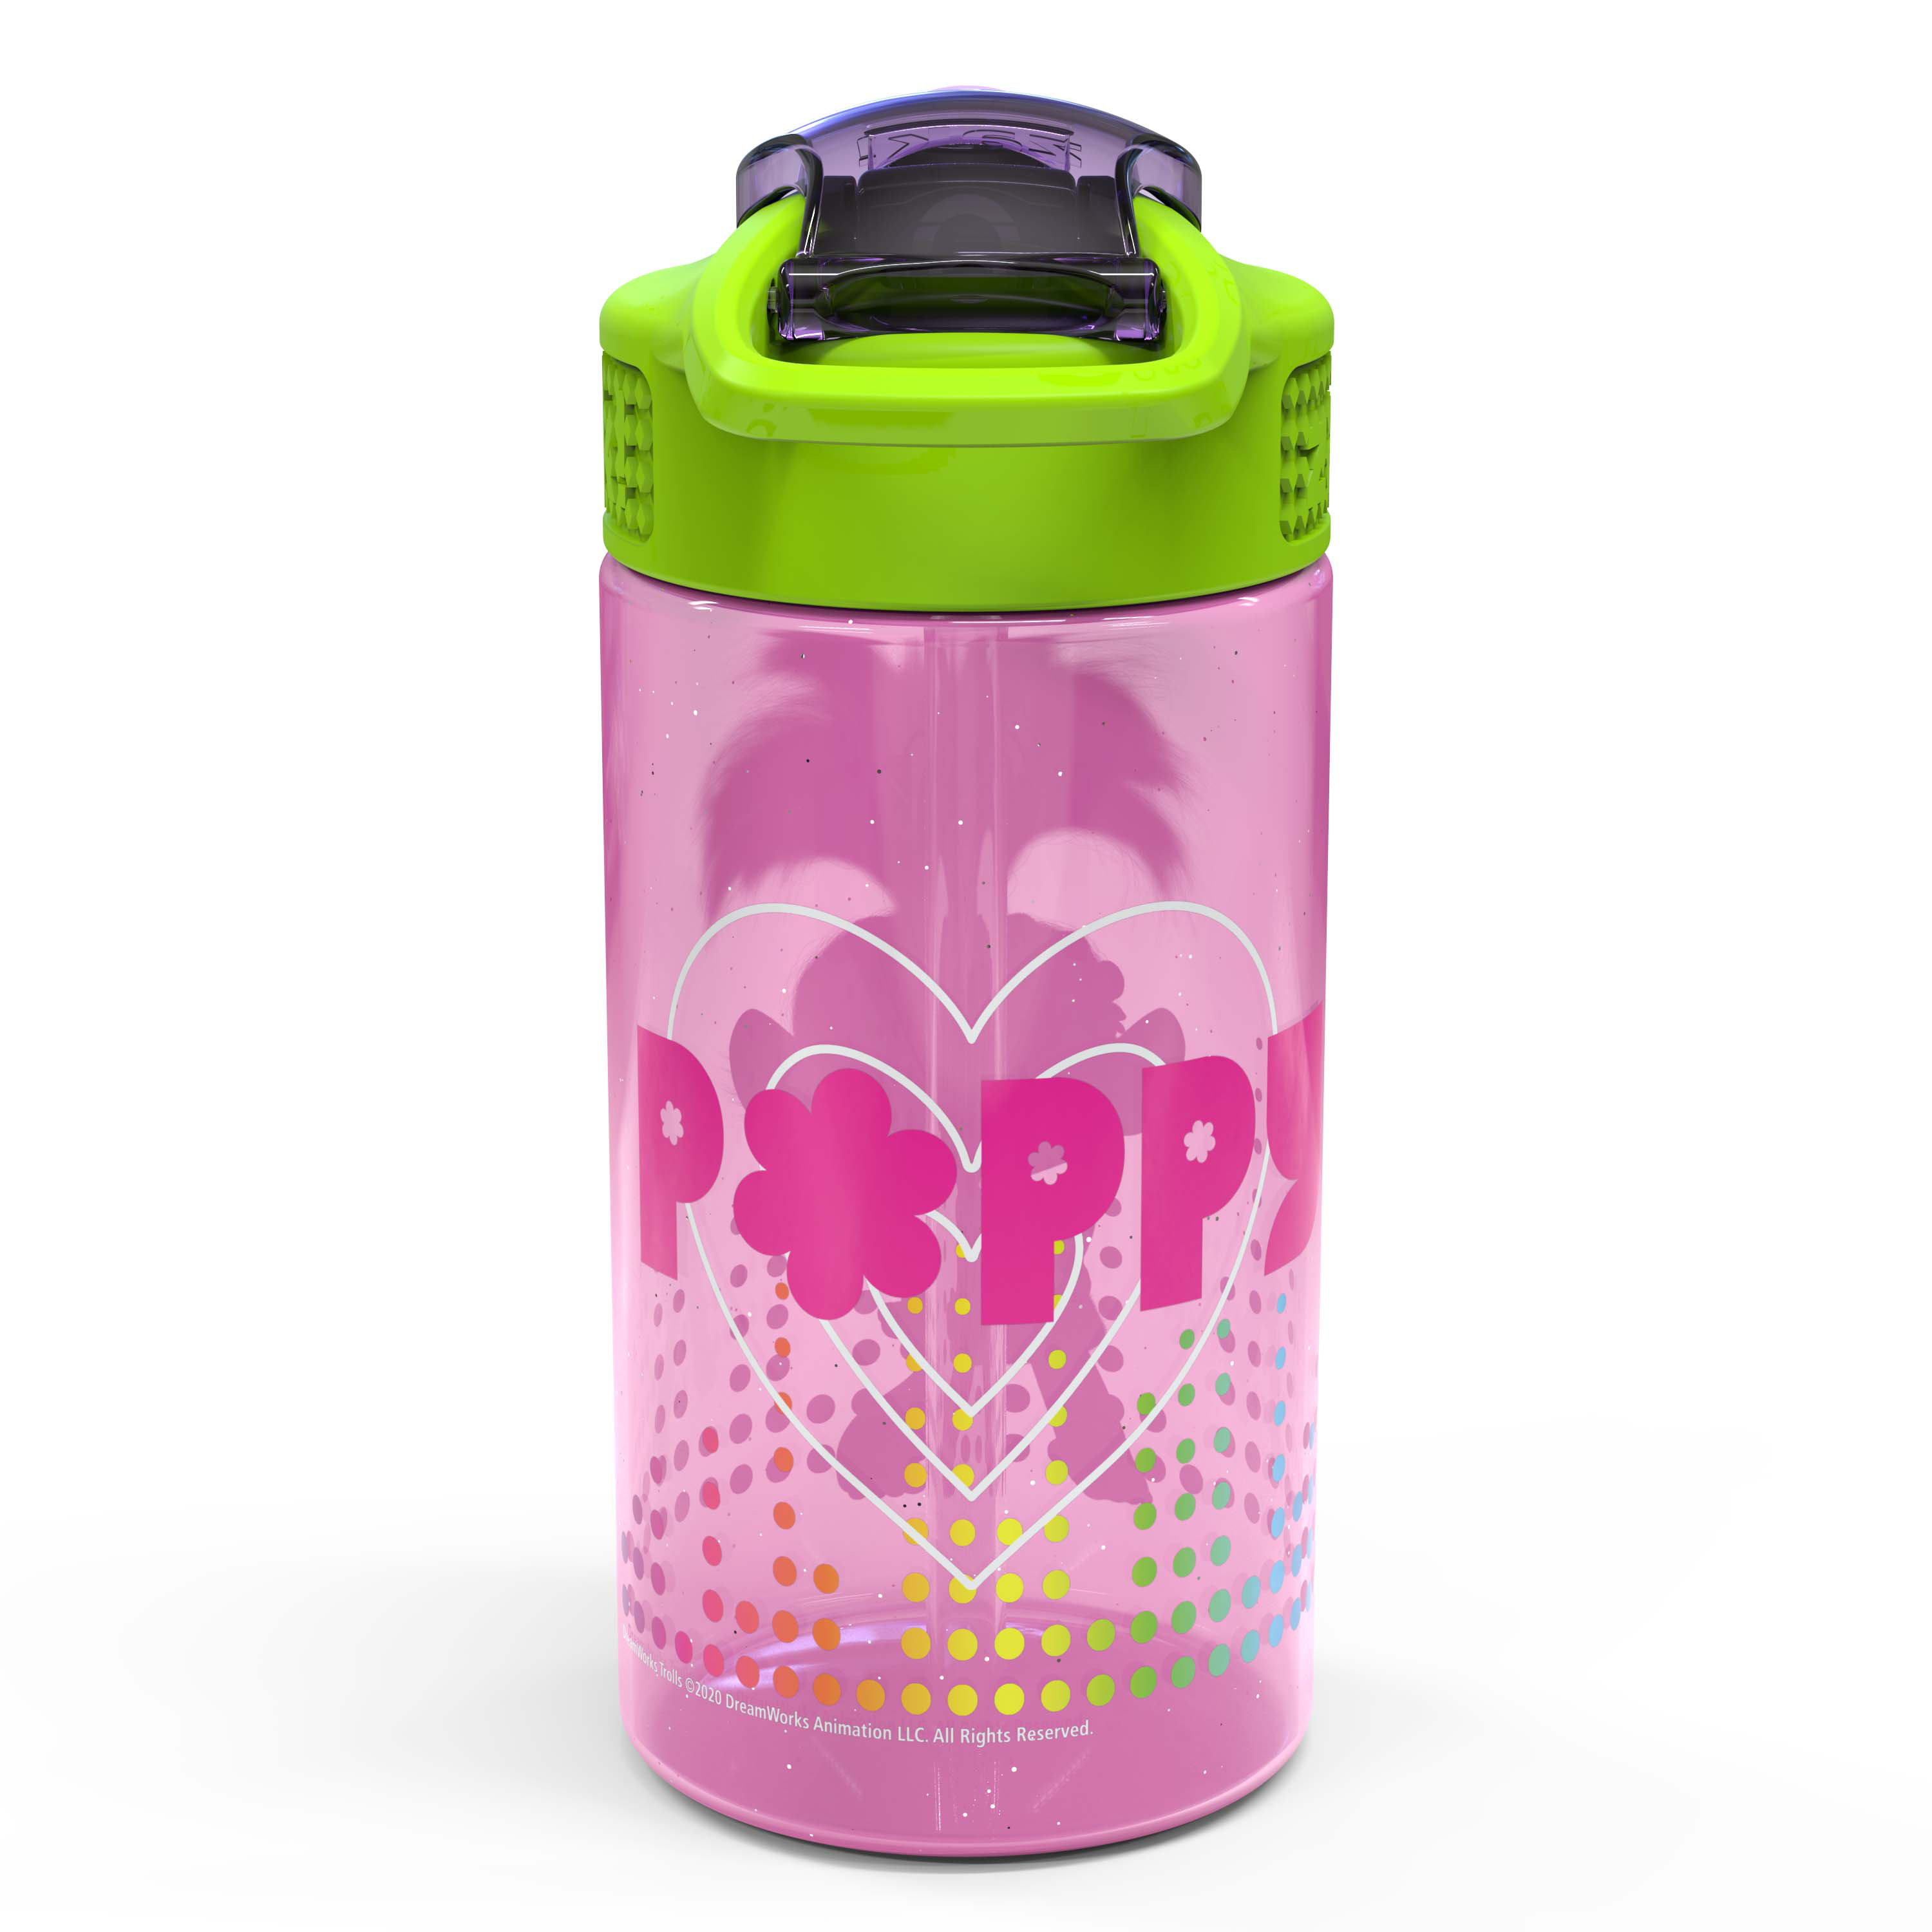 Zak Designs 16 oz Pink, Purple and Green Plastic Water Bottle with Straw and Wide Mouth Lid - image 3 of 8